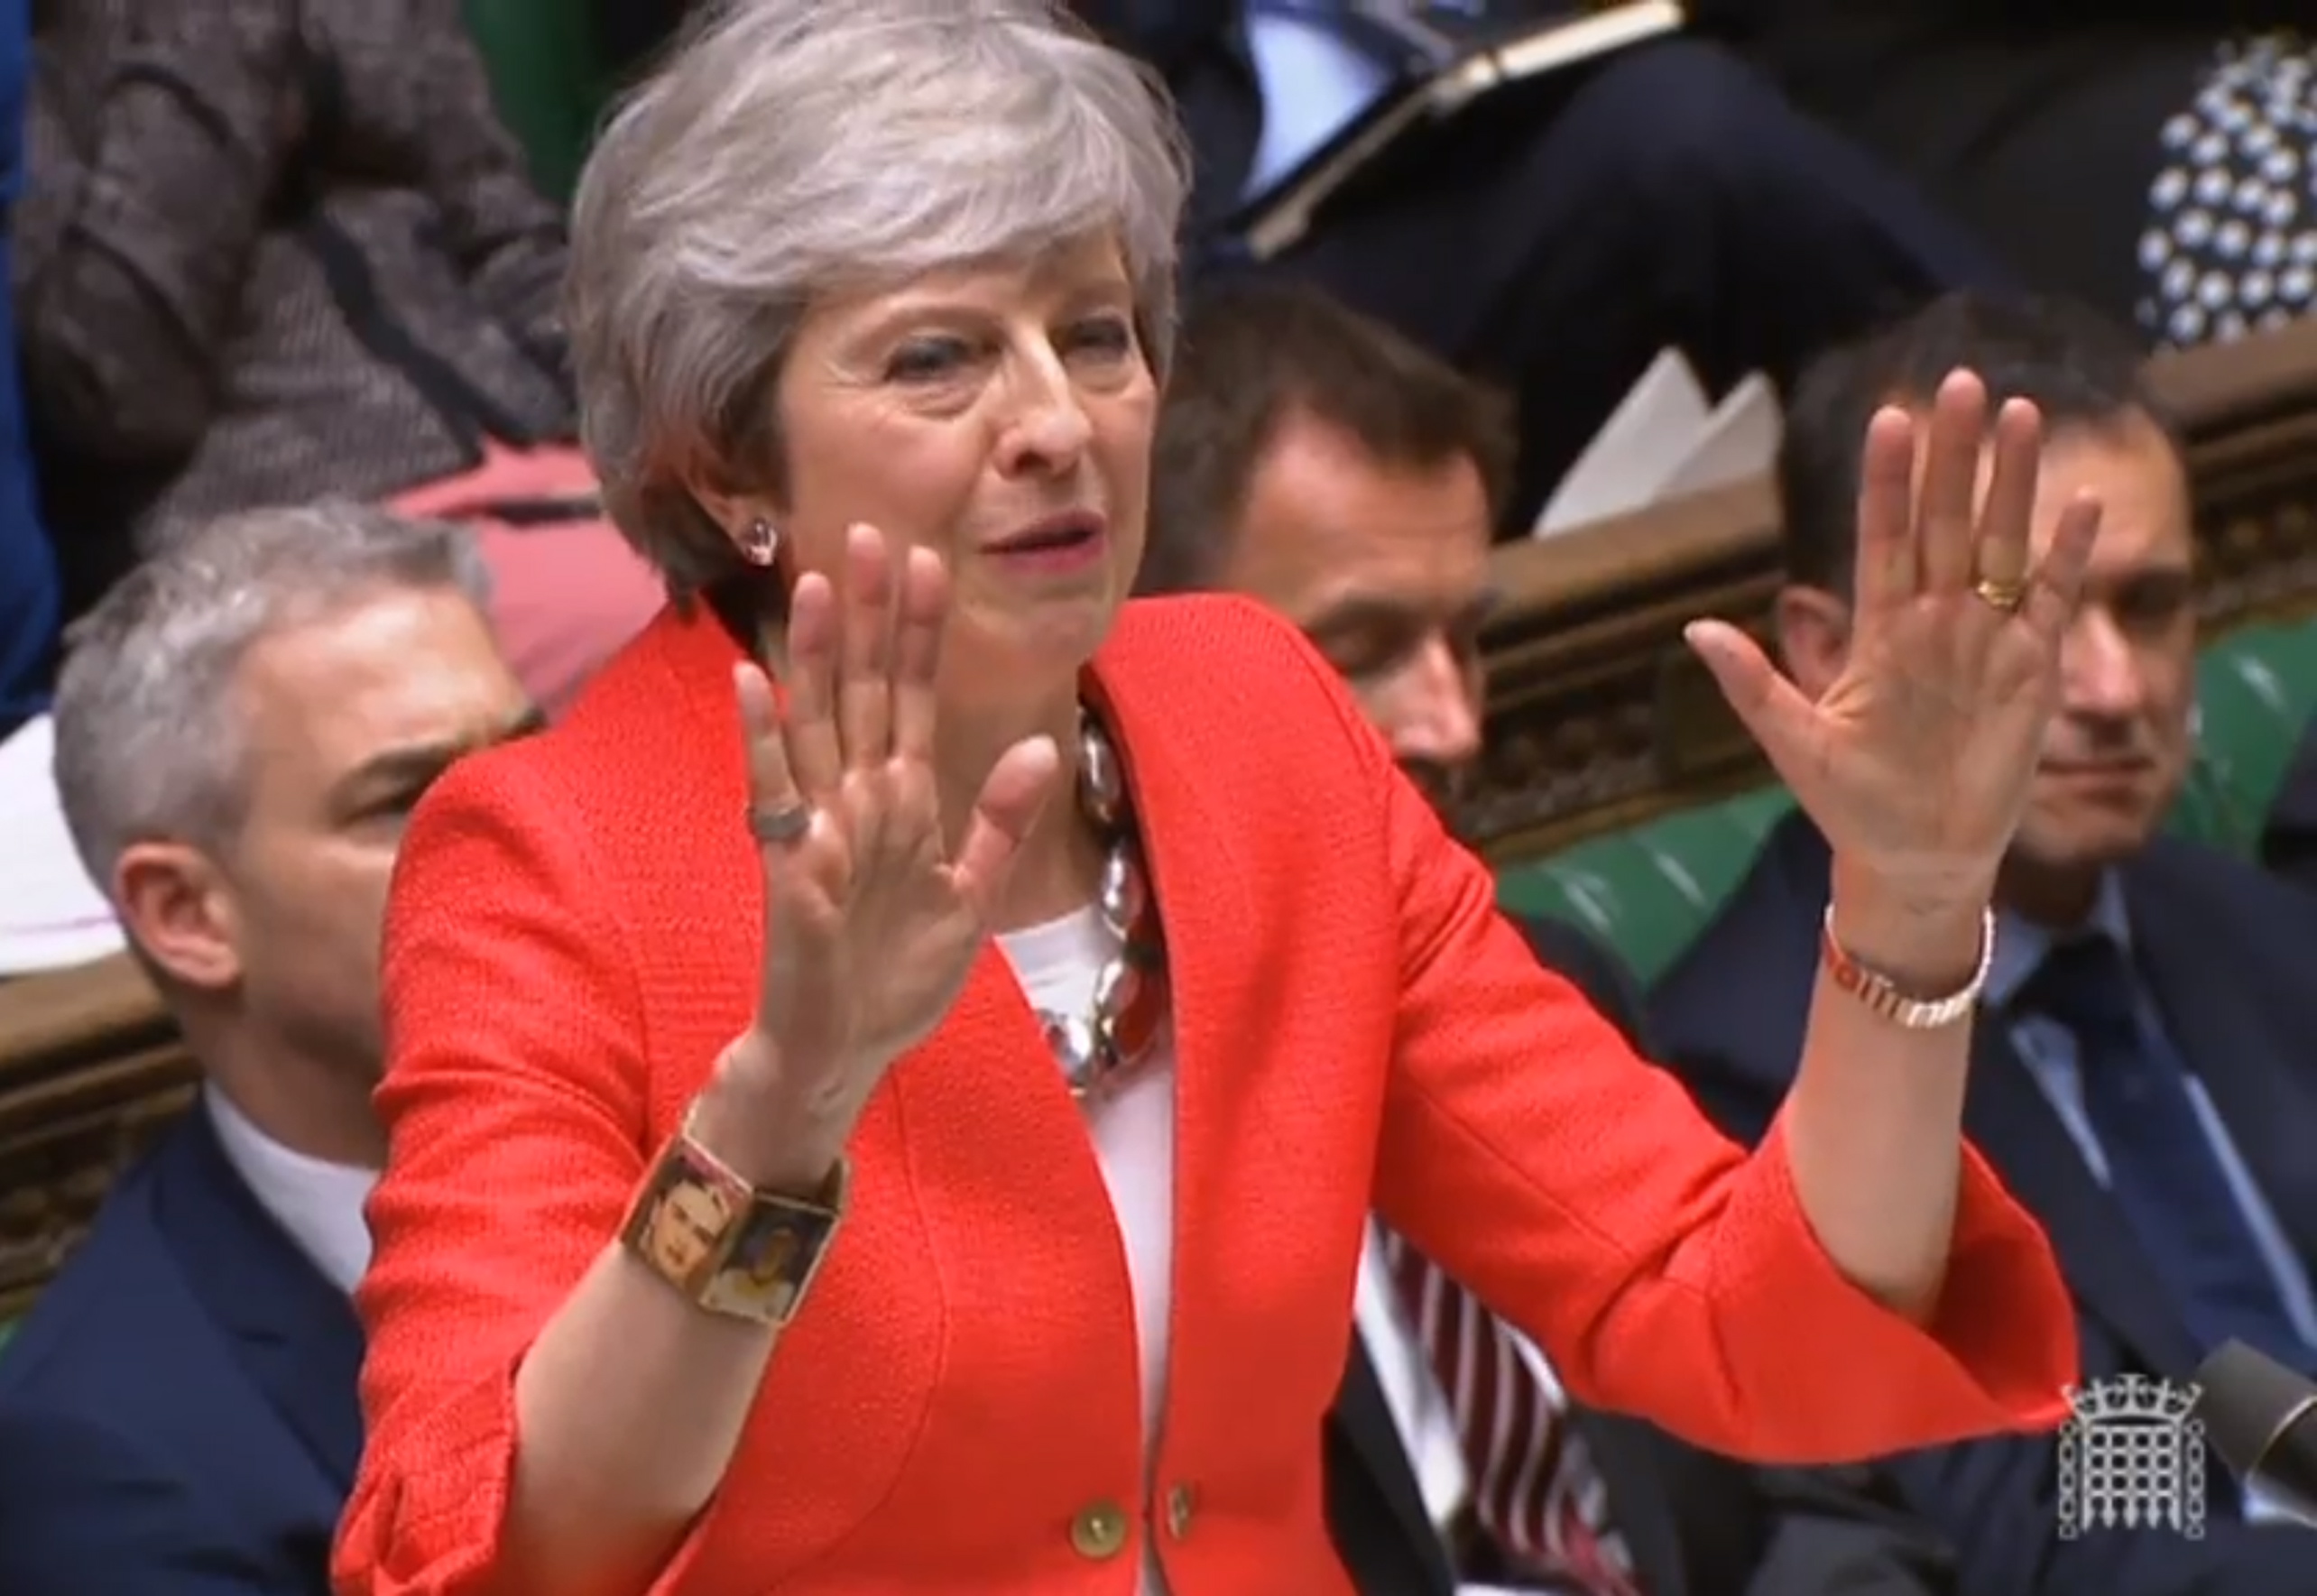 epa07431418 A grab from a handout video made available by the UK Parliamentary Recording Unit shows British Prime Minister Theresa May gestures during a debate at the House of Commons parliament in London, Britain, 12 March 2019. British parliament will vote on British Prime Minister May's amended Brexit deal later in the day. Theresa May wants parliament to back her 'improved' withdrawalk agreement she has negotiated with the EU over the so-called 'backstop'. The United Kingdom is officially due to leave the European Union on 29 March 2019, two years after triggering Article 50 in consequence to a referendum.  EPA/UK PARLIAMENTARY RECORDING UNIT / HANDOUT MANDATORY CREDIT: UK PARLIAMENTARY RECORDING UNIT HANDOUT EDITORIAL USE ONLY/NO SALES